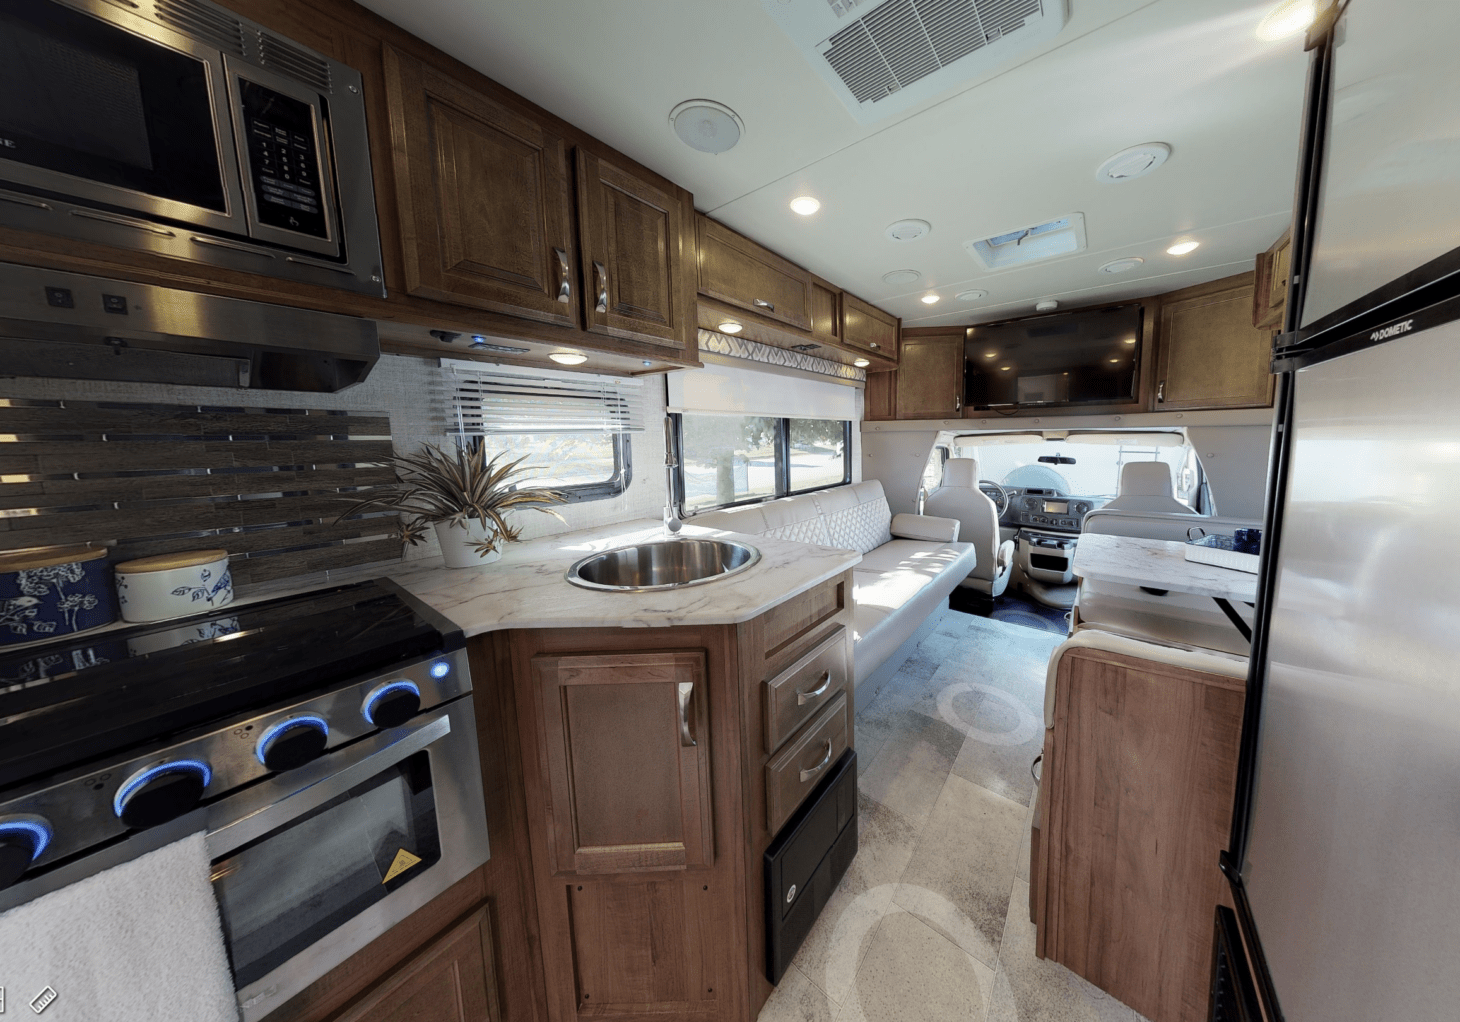 Interior of an RV with a sink, oven, microwave, fridge, dining area, and driver's cab featured 